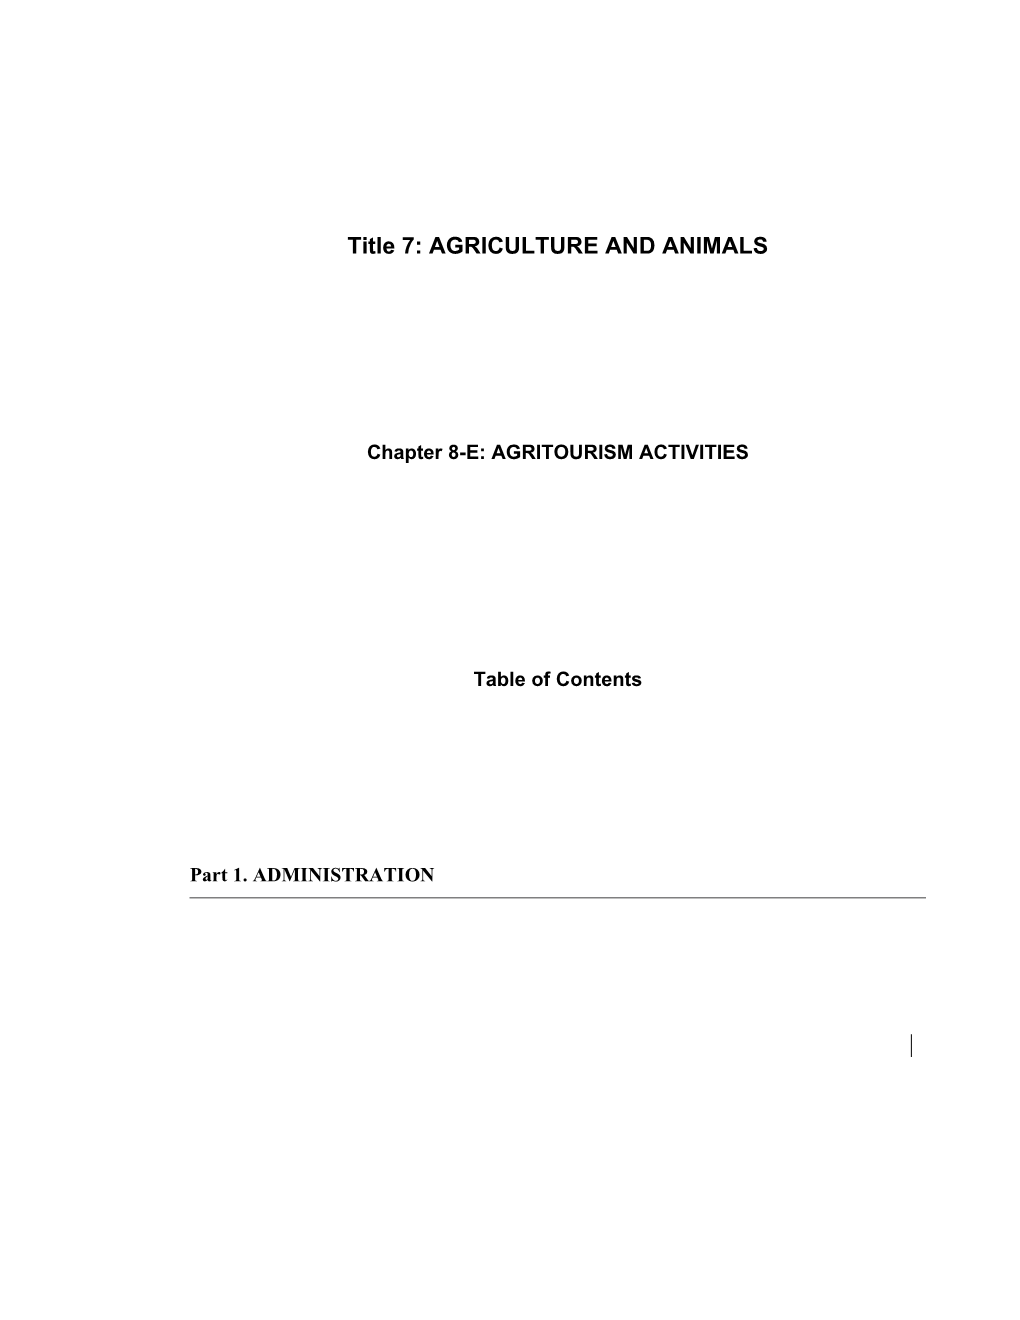 MRS Title 7, Chapter8-E: AGRITOURISM ACTIVITIES